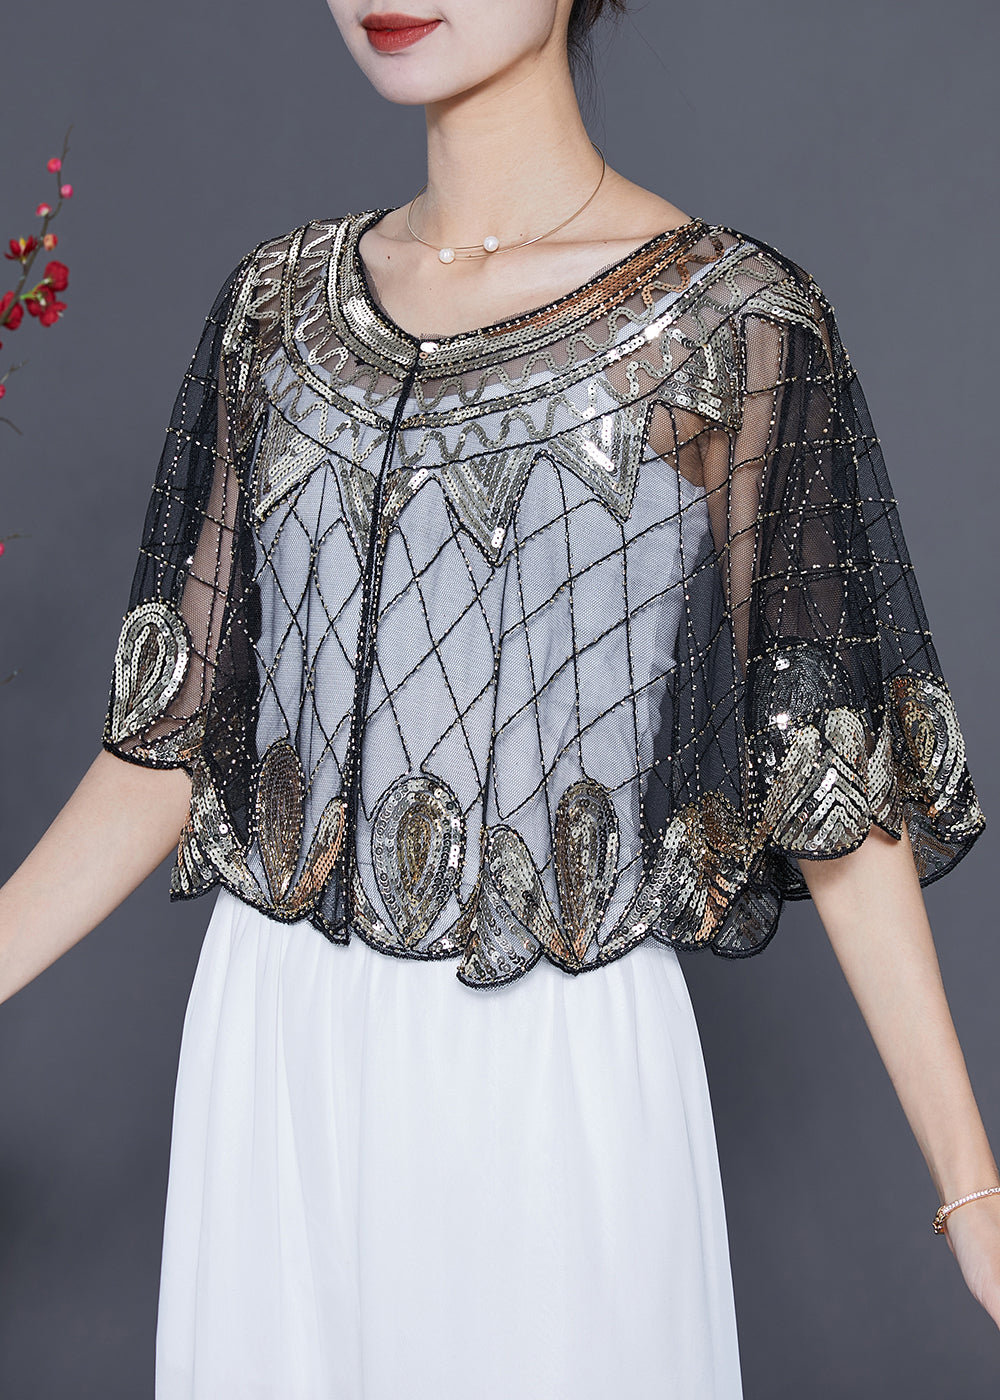 Silvery Sequins Loose Tulle Smock Embroideried Summer LY5579 - fabuloryshop